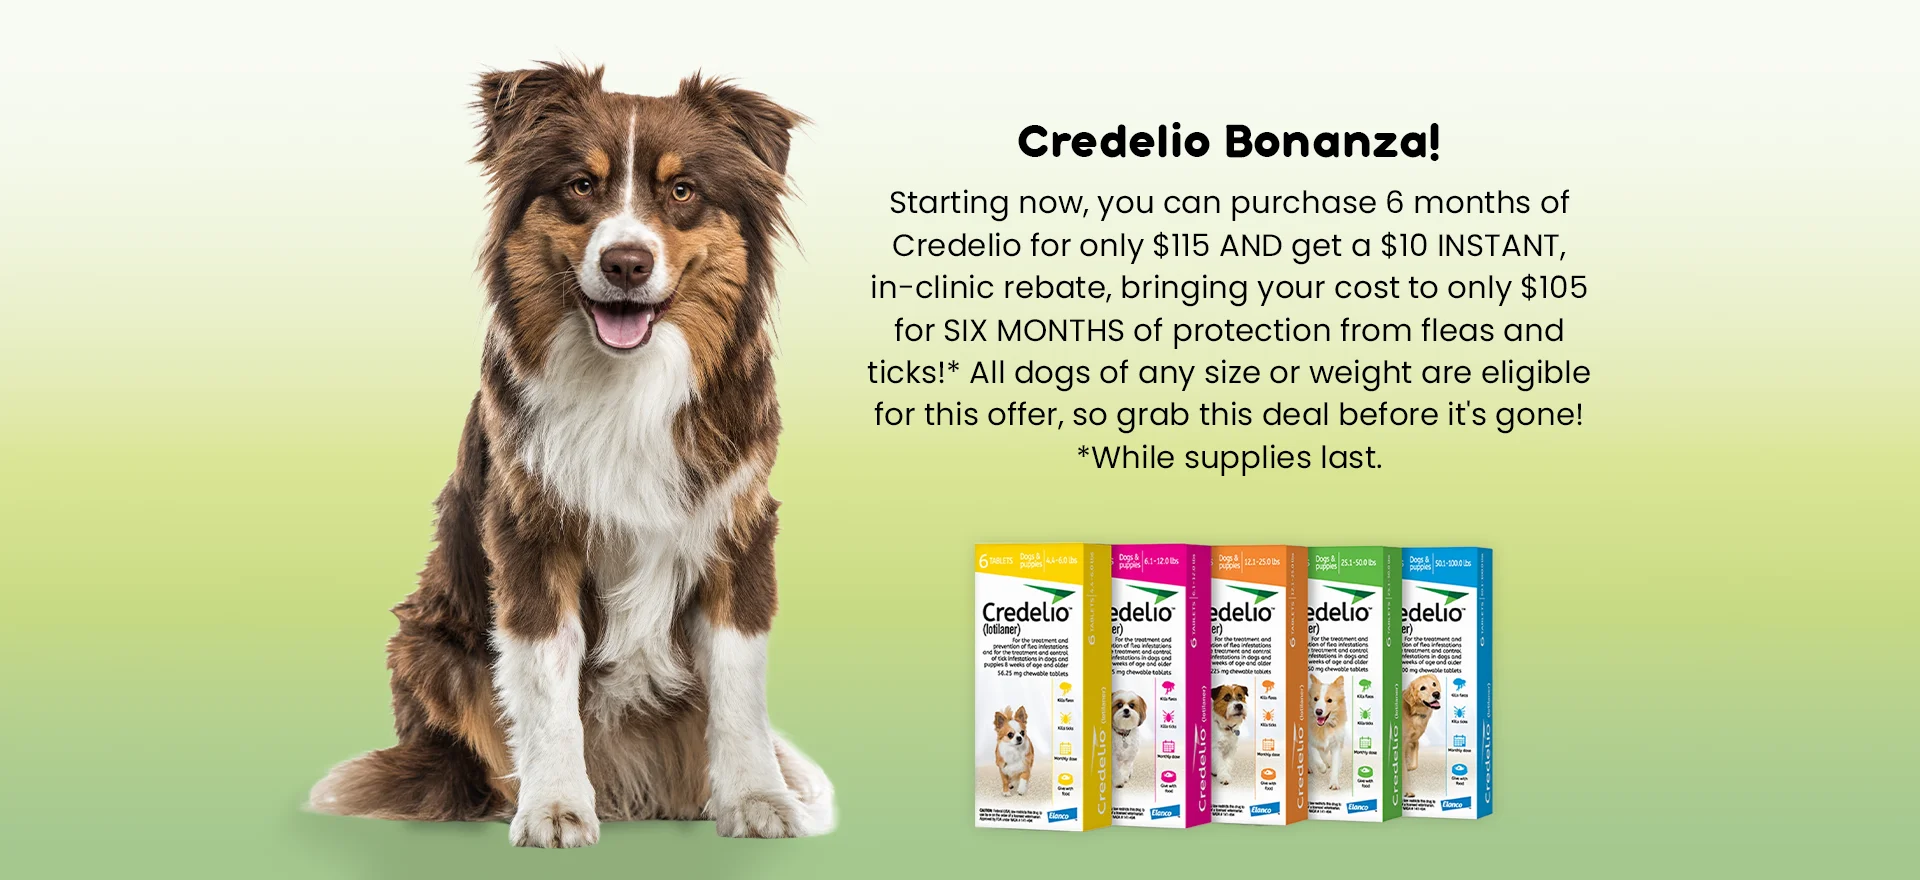 Starting now, you can purchase 6 months of Credelio for only $115 AND get a $10 INSTANT, in-clinic rebate, bringing your cost to only $105 for SIX MONTHS of protection from fleas and ticks!